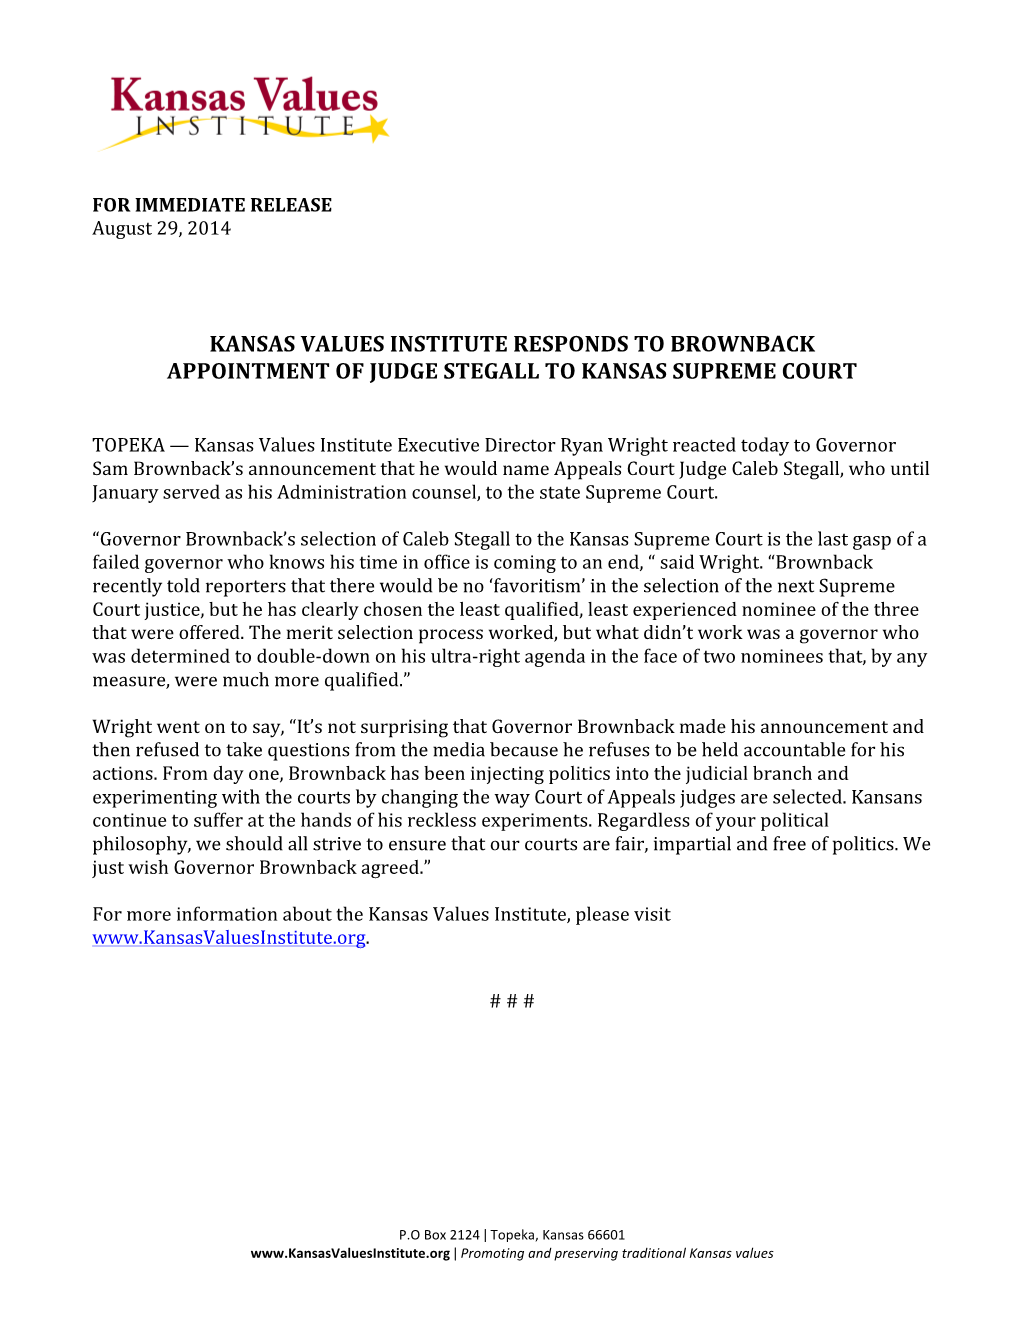 Kansas Values Institute Responds to Brownback Appointment of Judge Stegall to Kansas Supreme Court